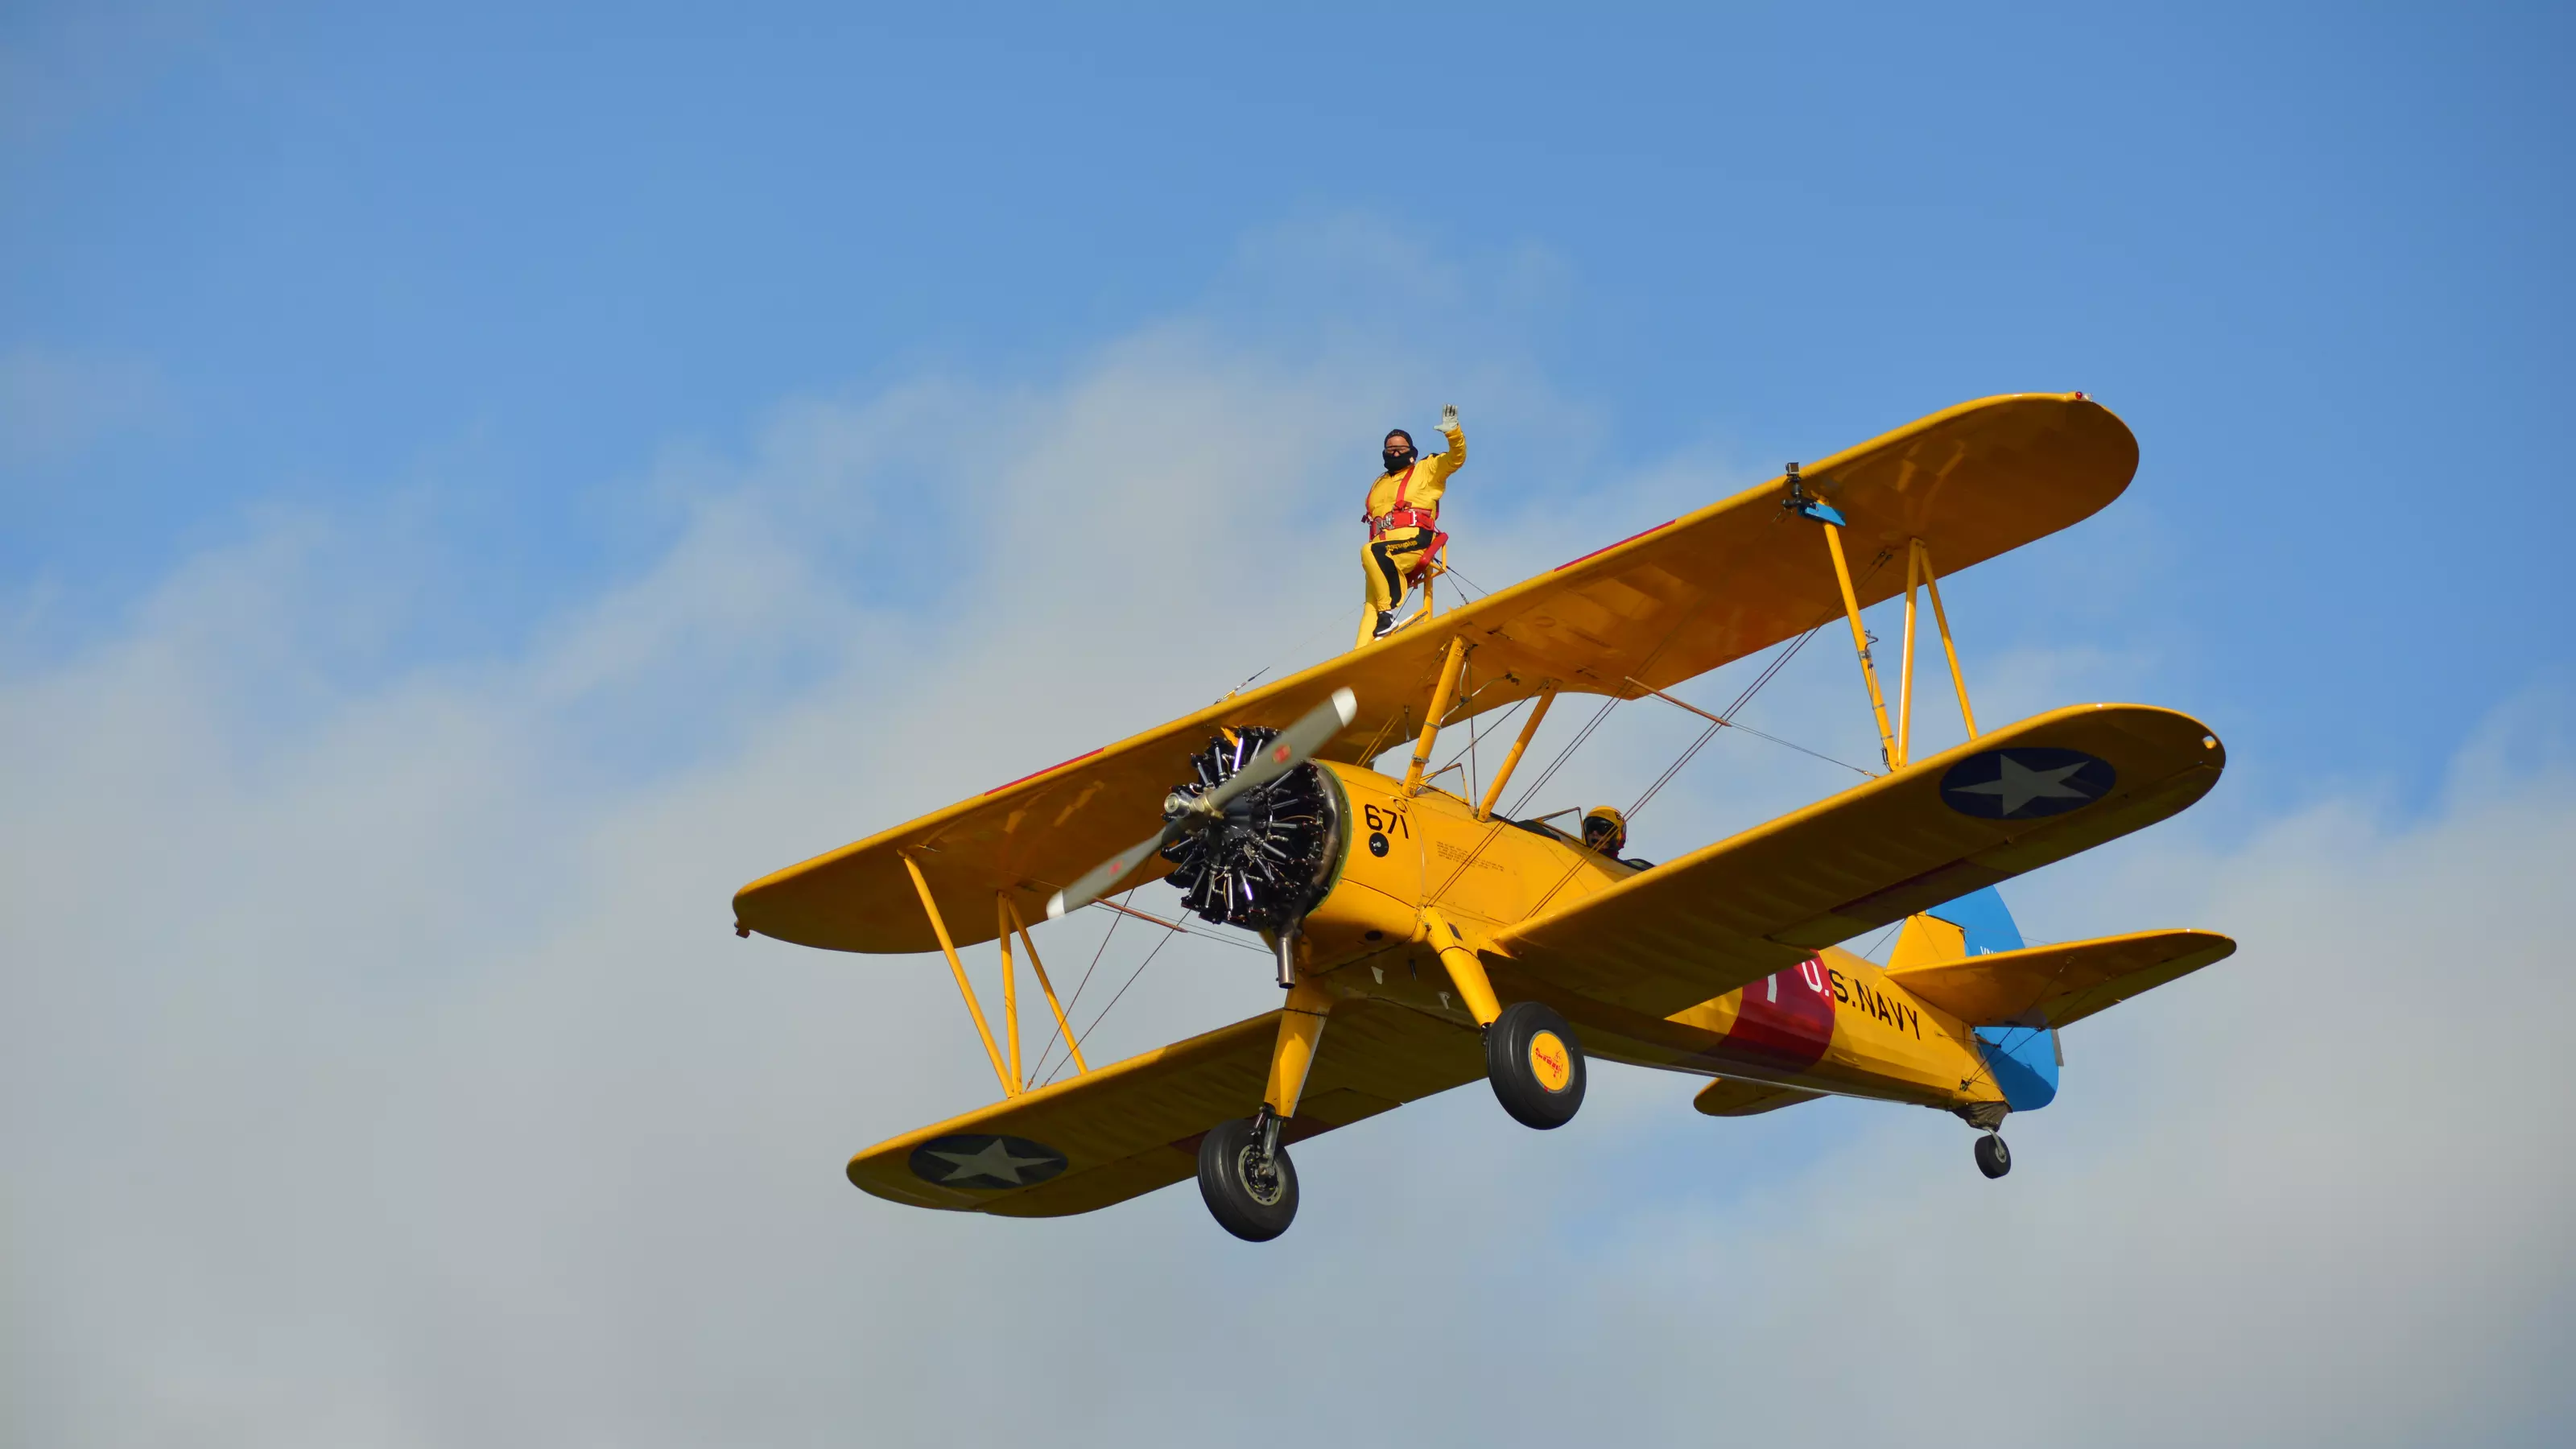 Man waving while safely strapped to the wing of a yellow plane as part of the Wingwalk challenge event.